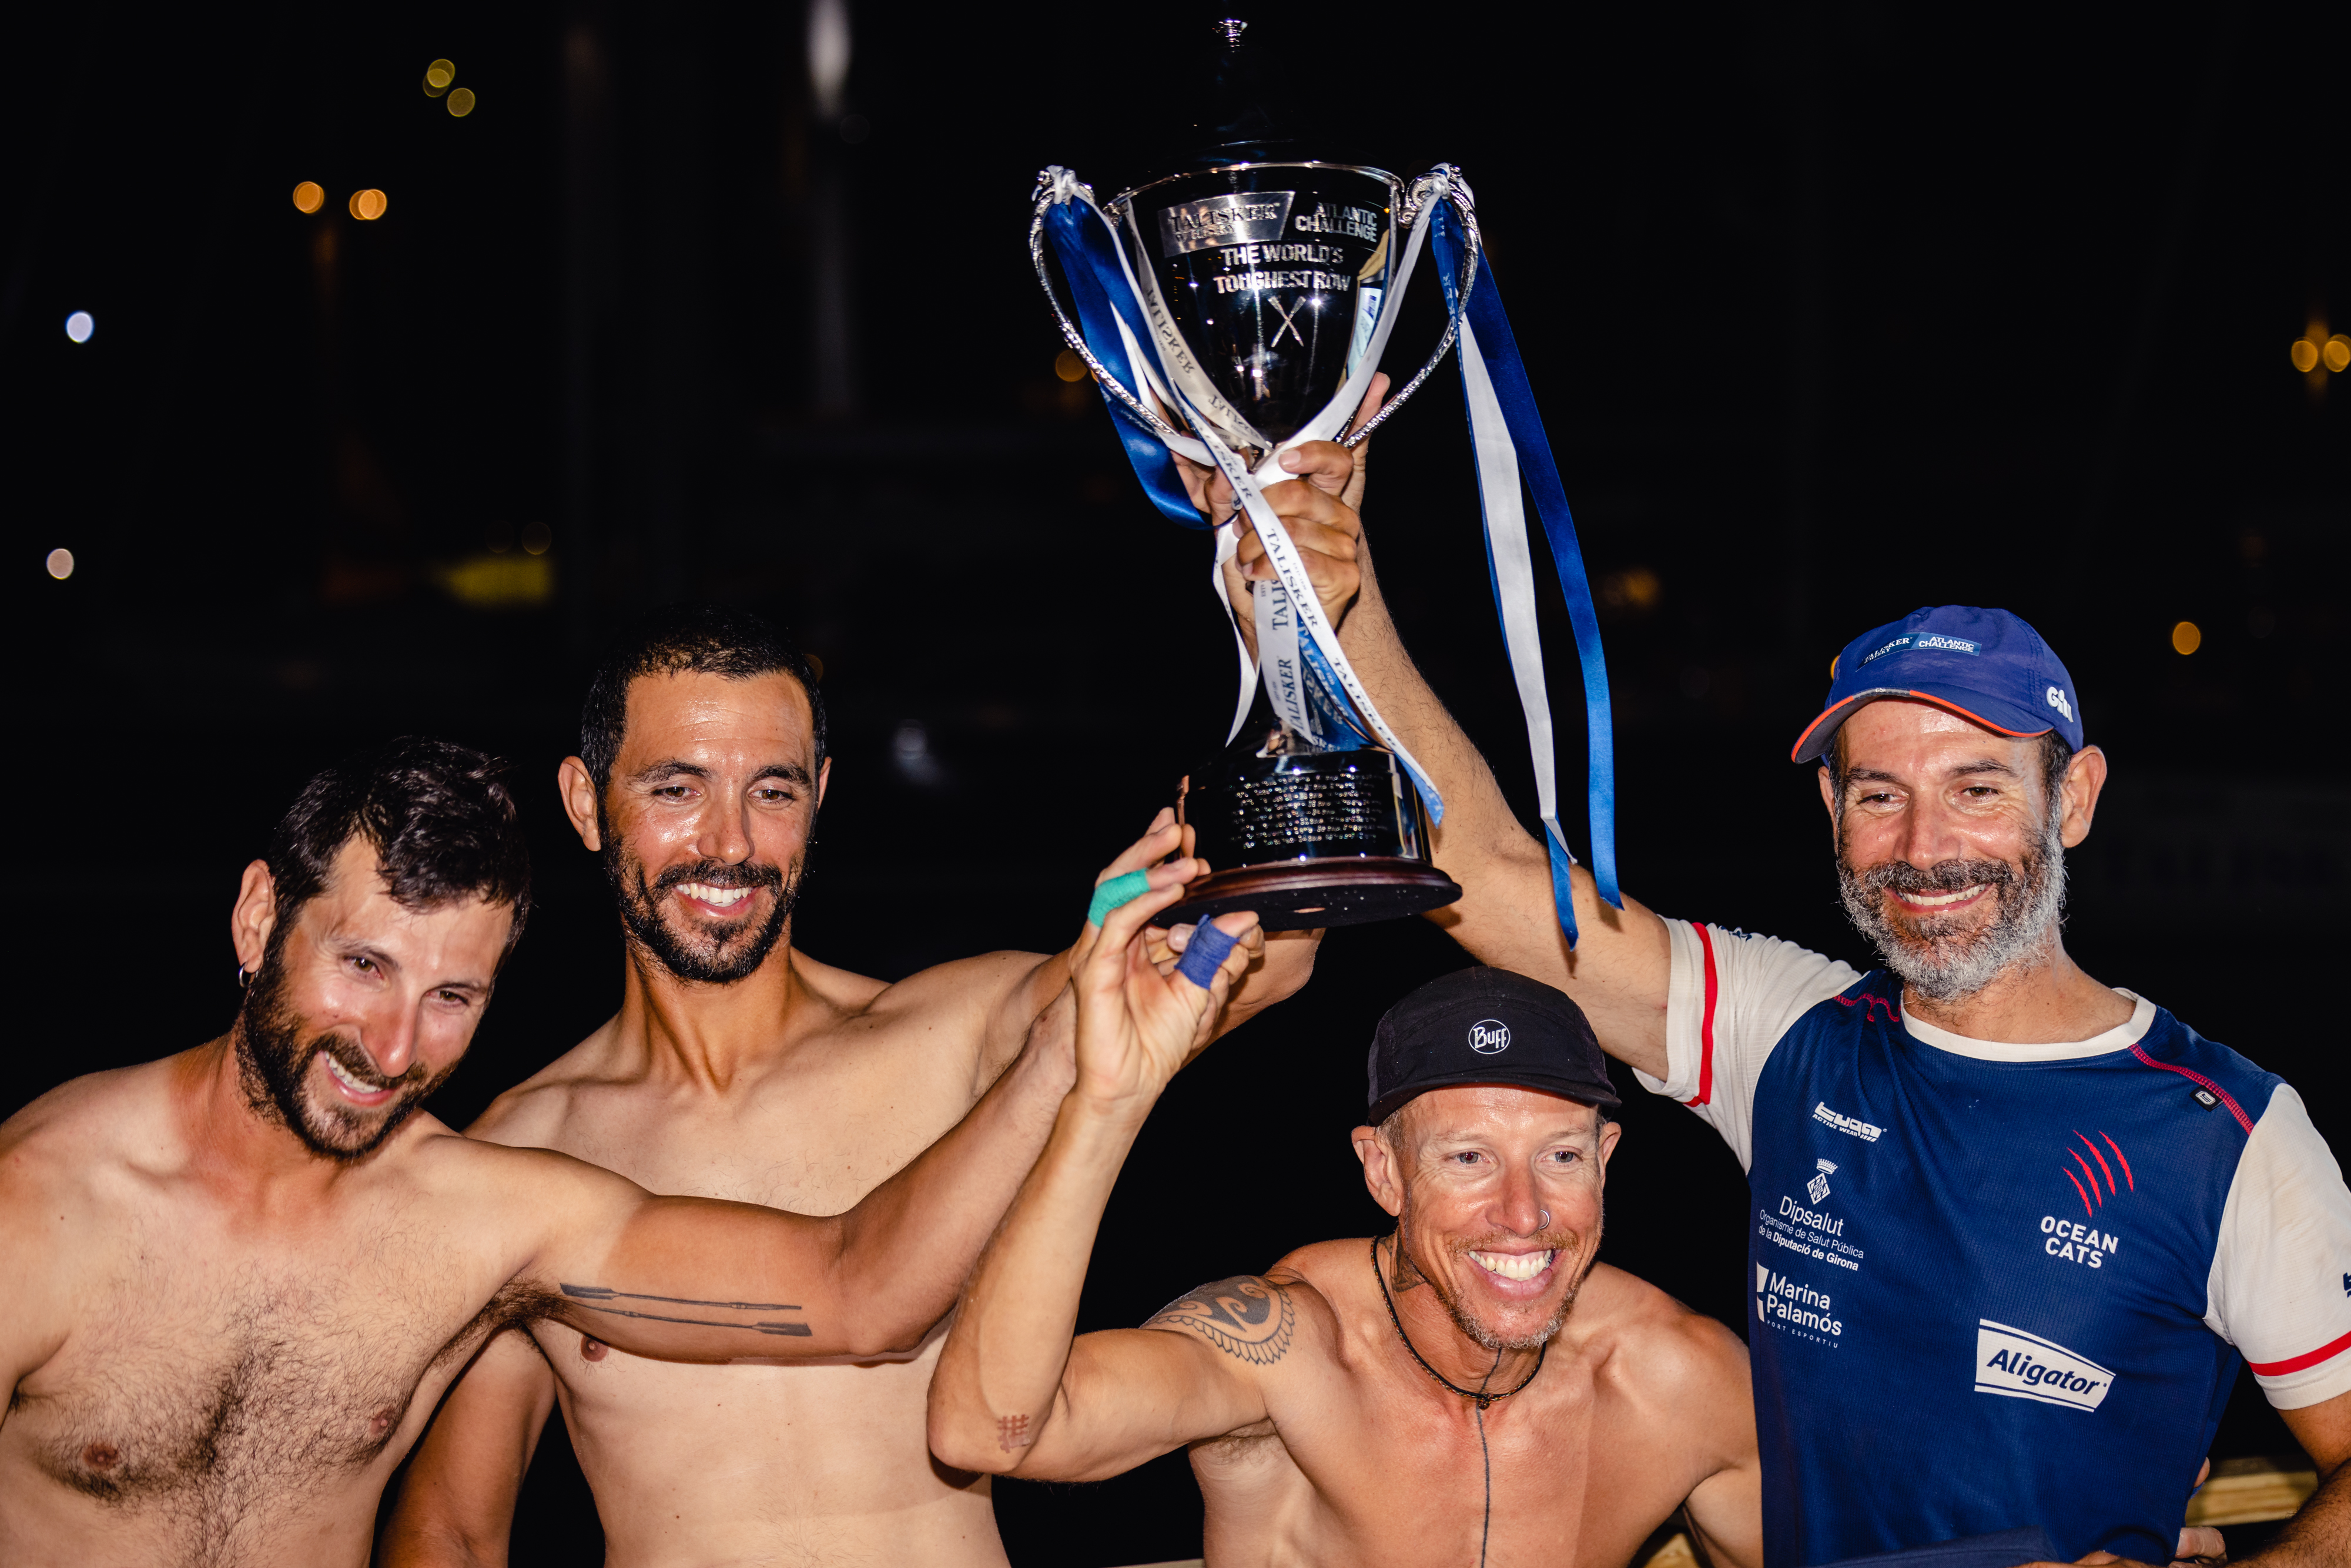 Ocean Cats rowers with the MacAskill Trophy after winning the Talisker Atlantic Challenge 2022 as they reached Antigua and Barbuda in 31 days, 17 hours, and nine minutes